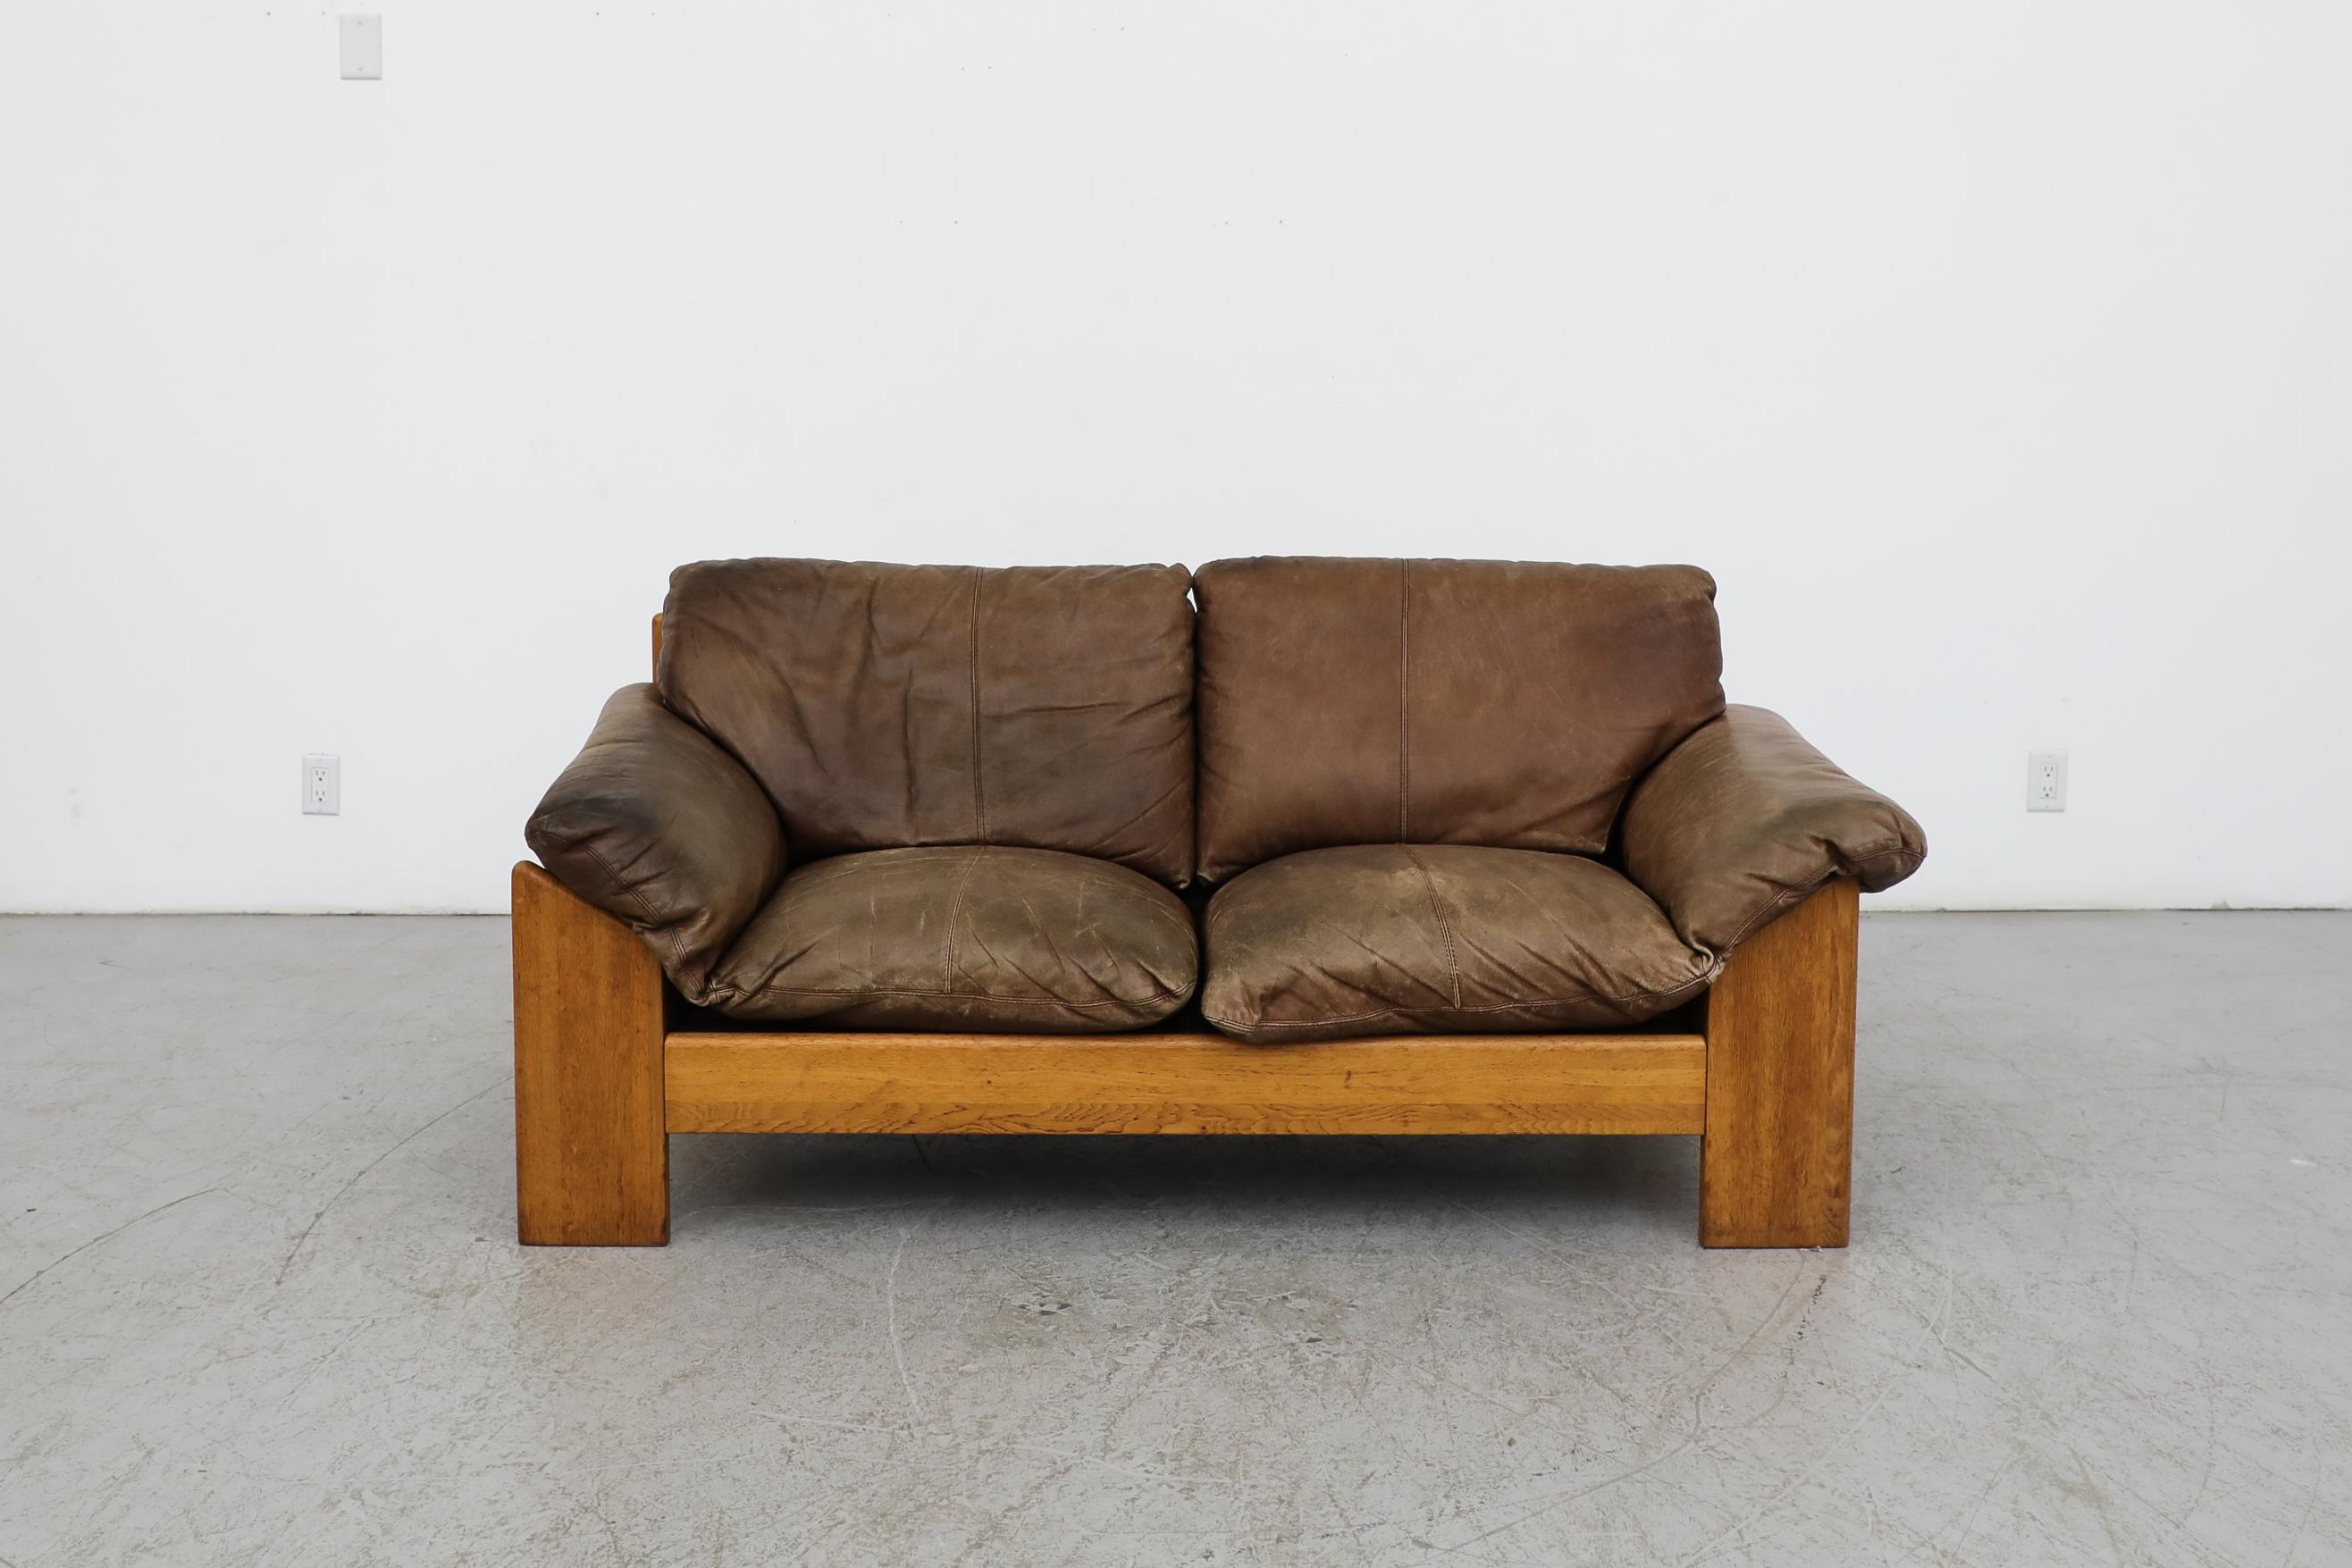 Handsome, Mid-Century Leolux two seater loveseat with beautifully patinated, thick natural leather and a lightly refinished oak frame with a matching inset leather back panel. This model is very similar to the Italian 'Sapporo' Sofa by Mobil Girgi.